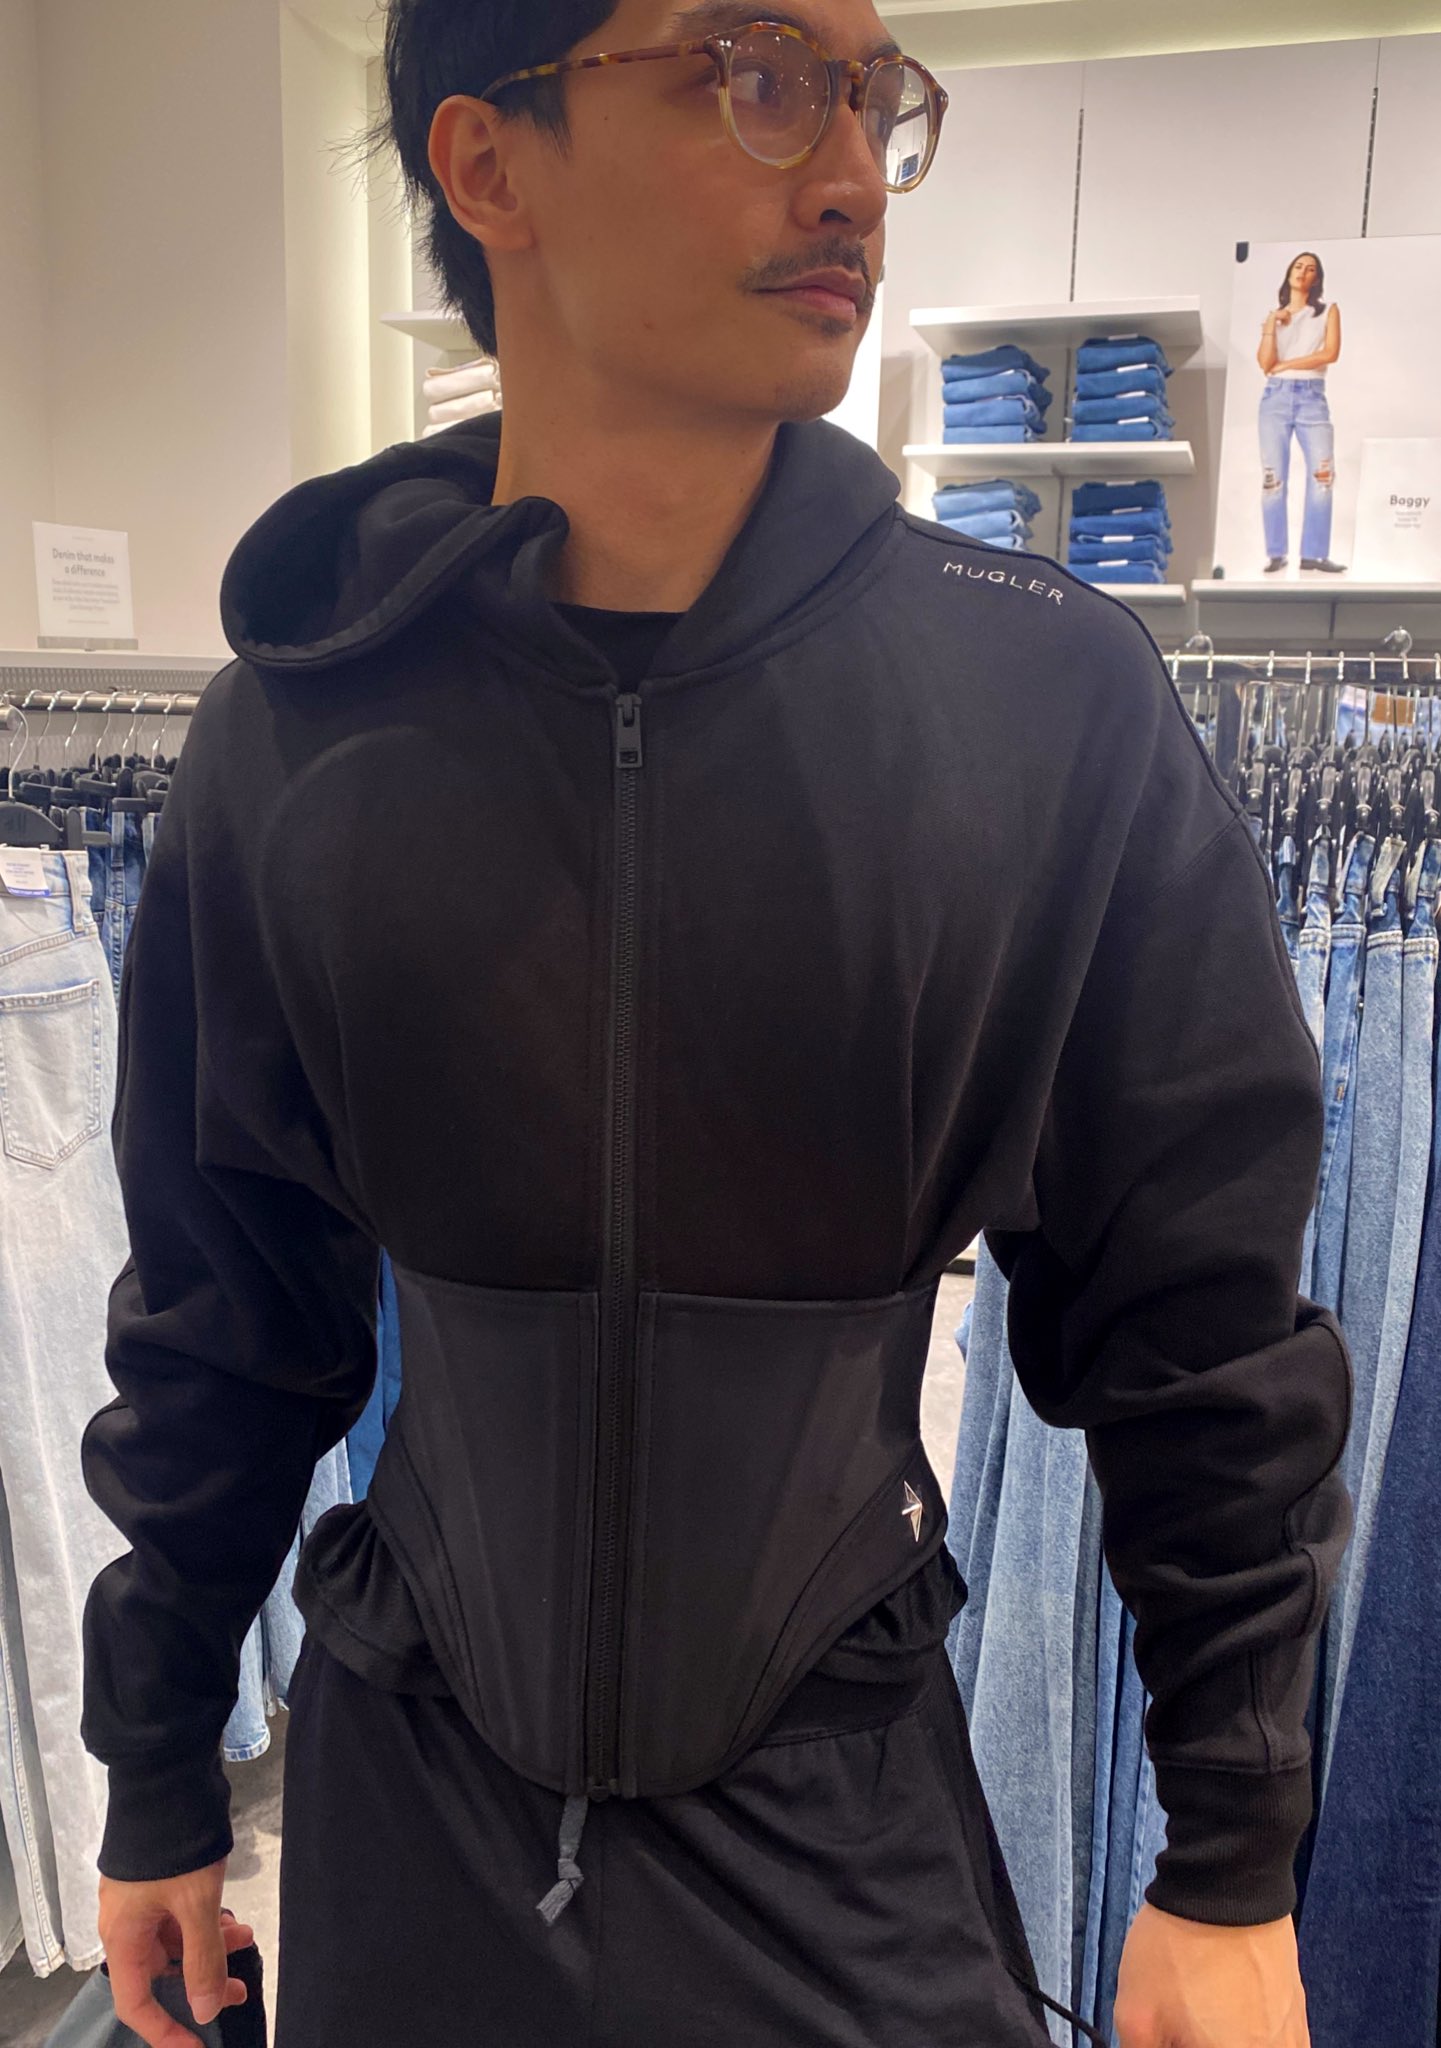 shufitri on X: Mugler H&M - Got to try on this corset hoodie